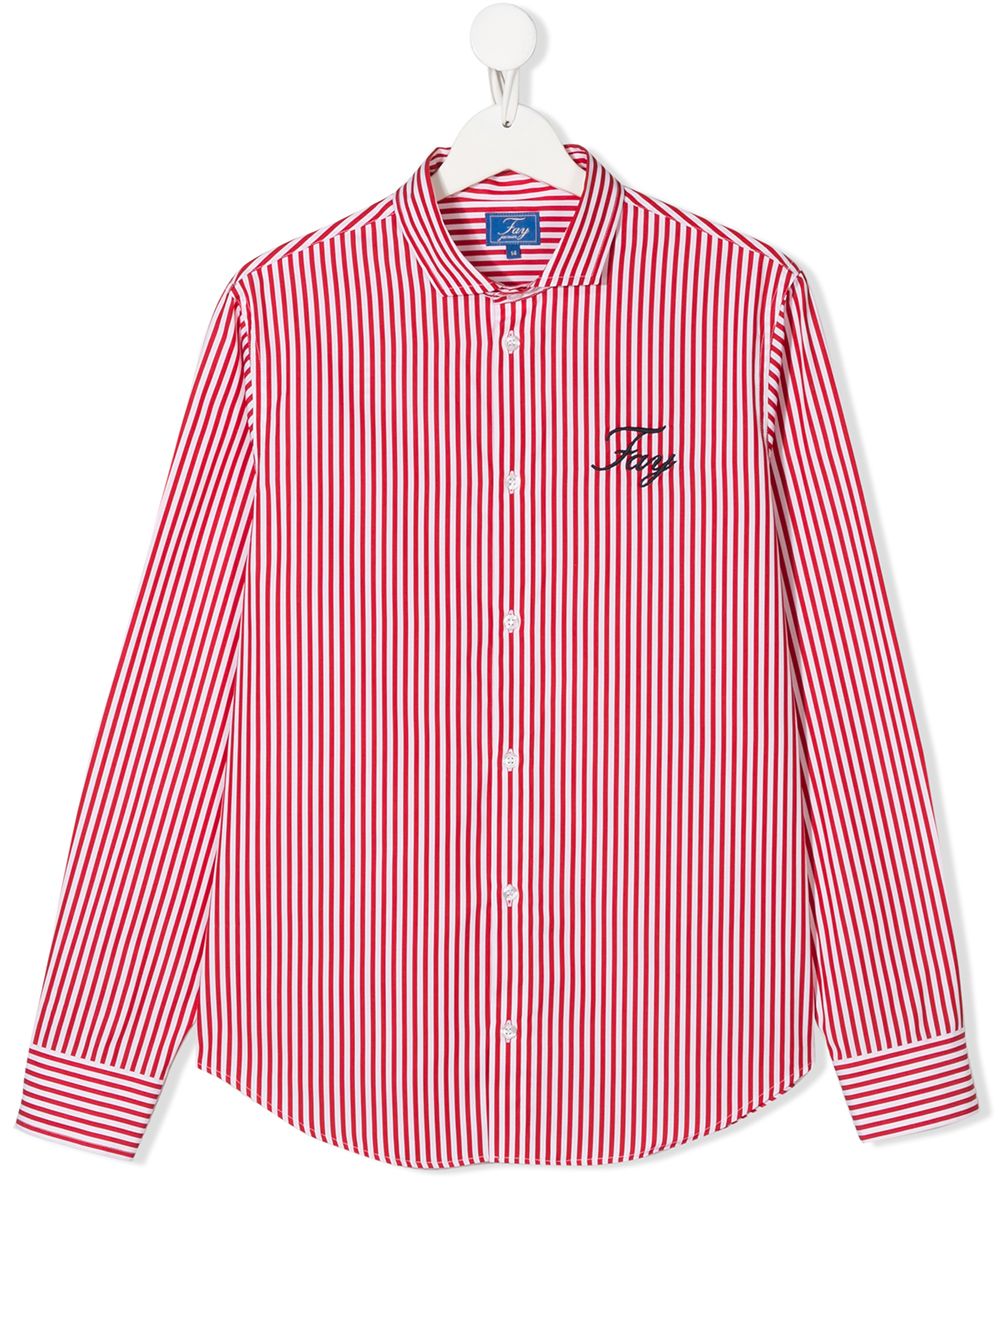 Fay Teen Striped Print Shirt In Red